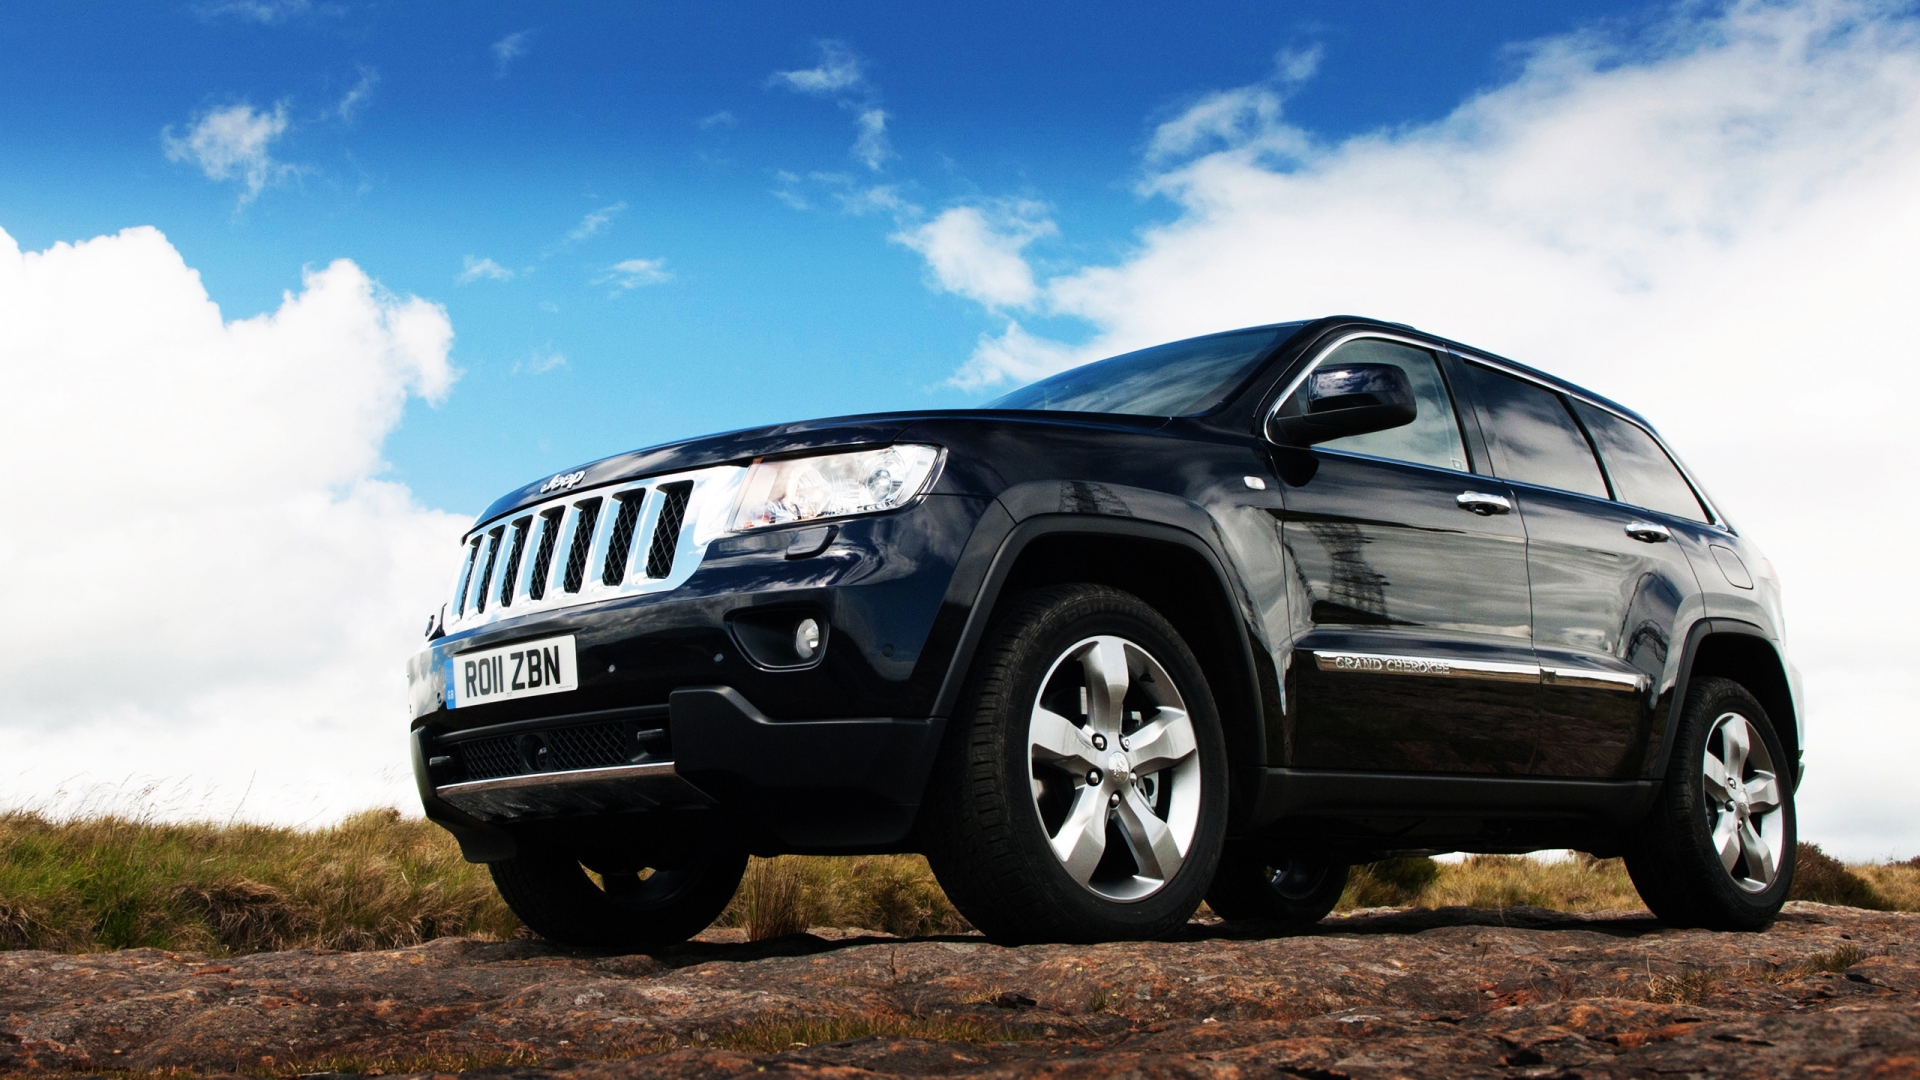 2011 Jeep Grand Cherokee for 1920 x 1080 HDTV 1080p resolution